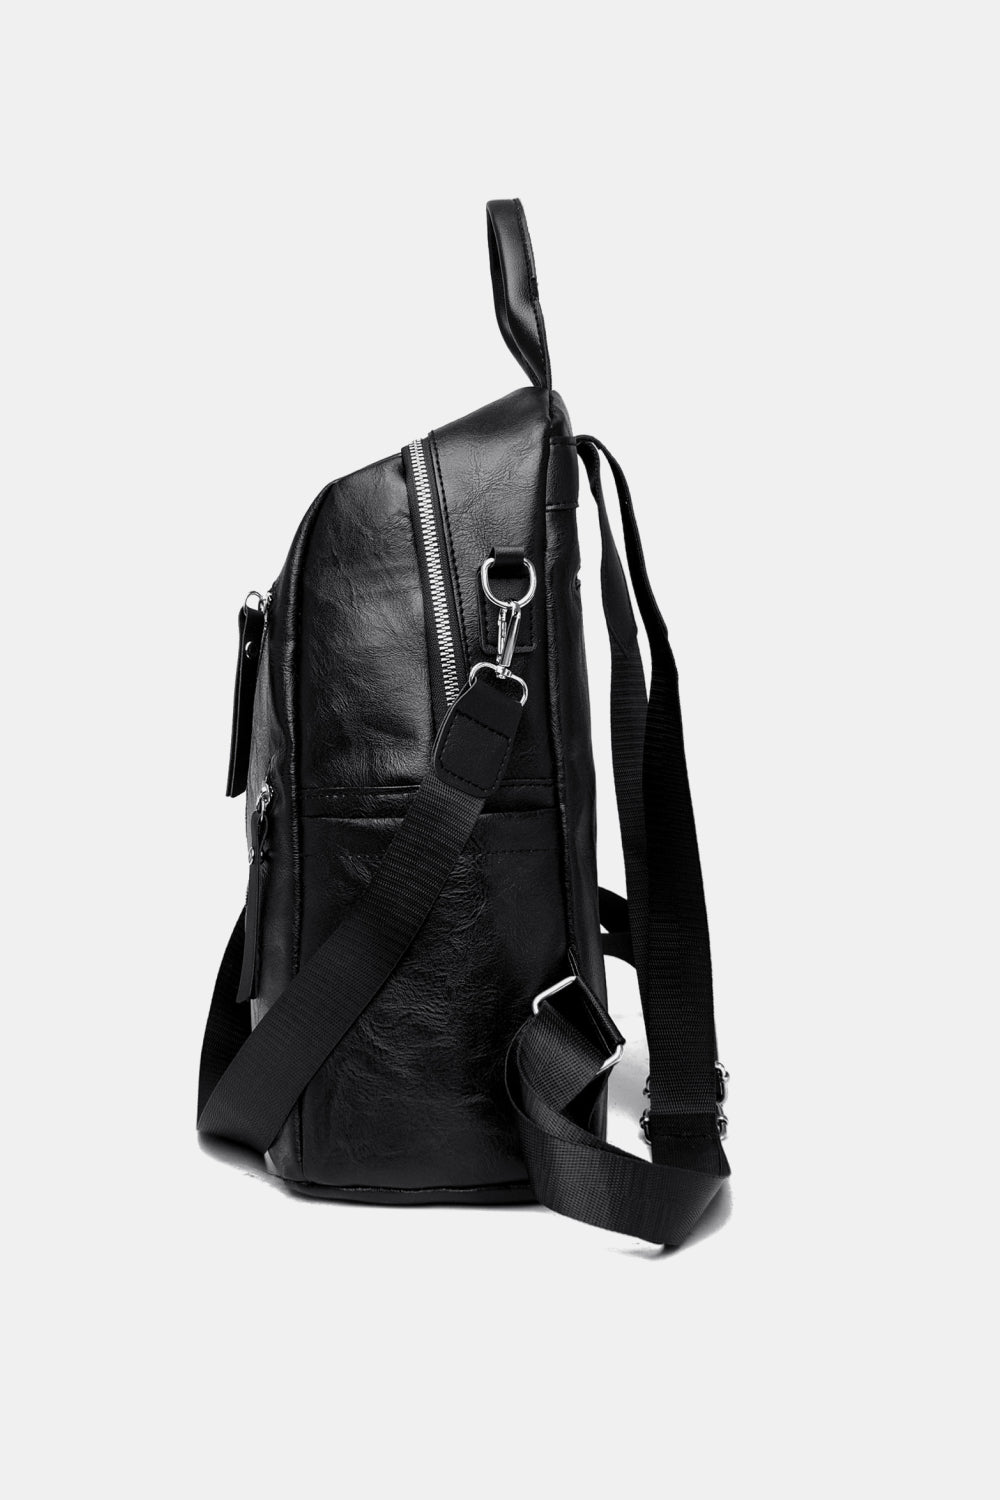 Luxury Leather Convertible Backpack